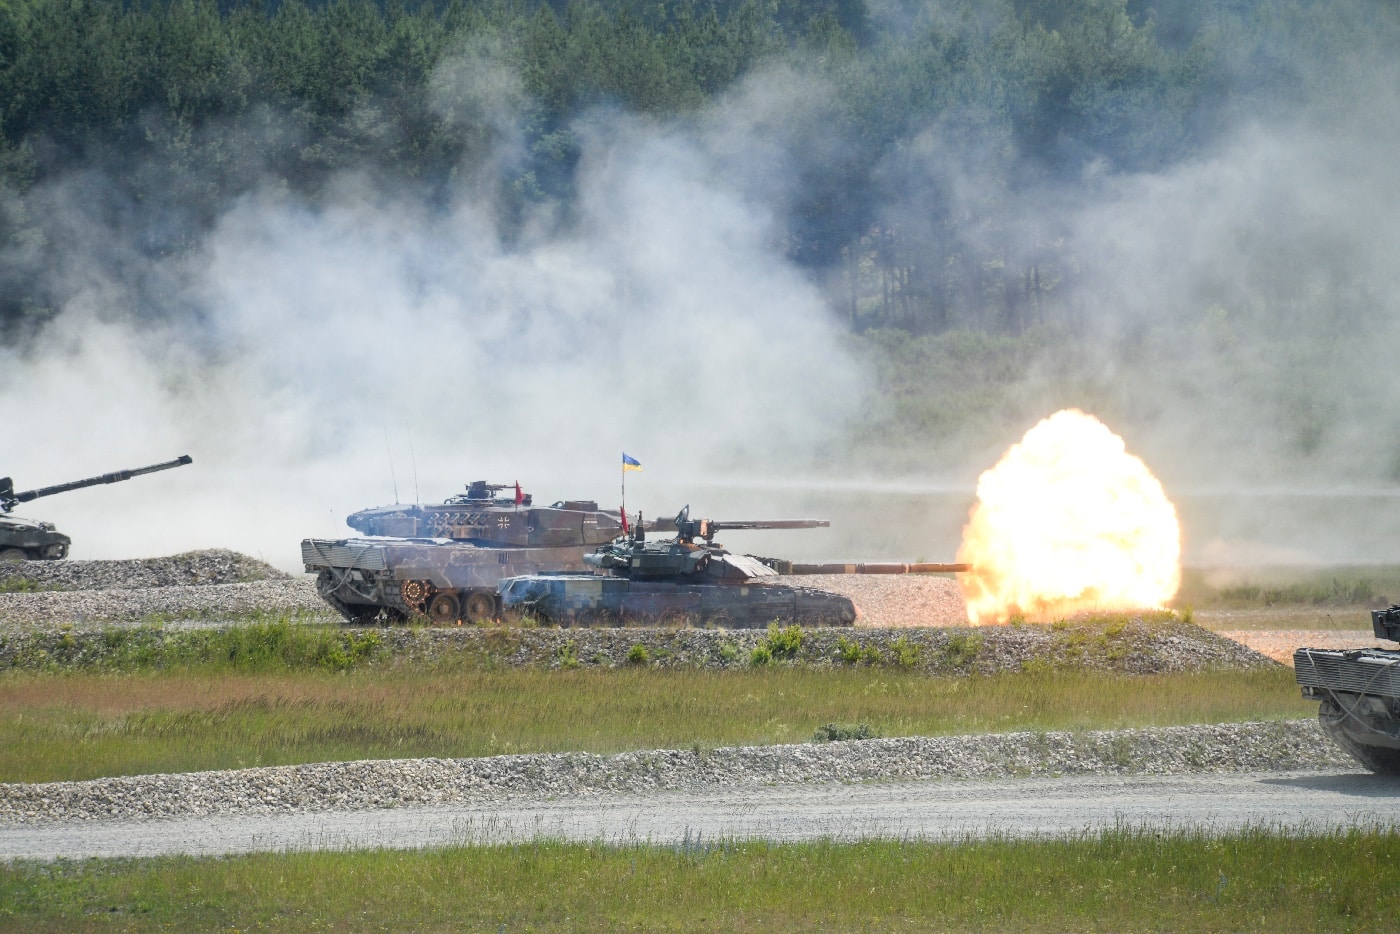 In this photo, we see both Ukrainian T-84 and German Leopard II tanks firing their guns during a training exercise in Germany. The T-84 is smaller than the Leopard II tank.